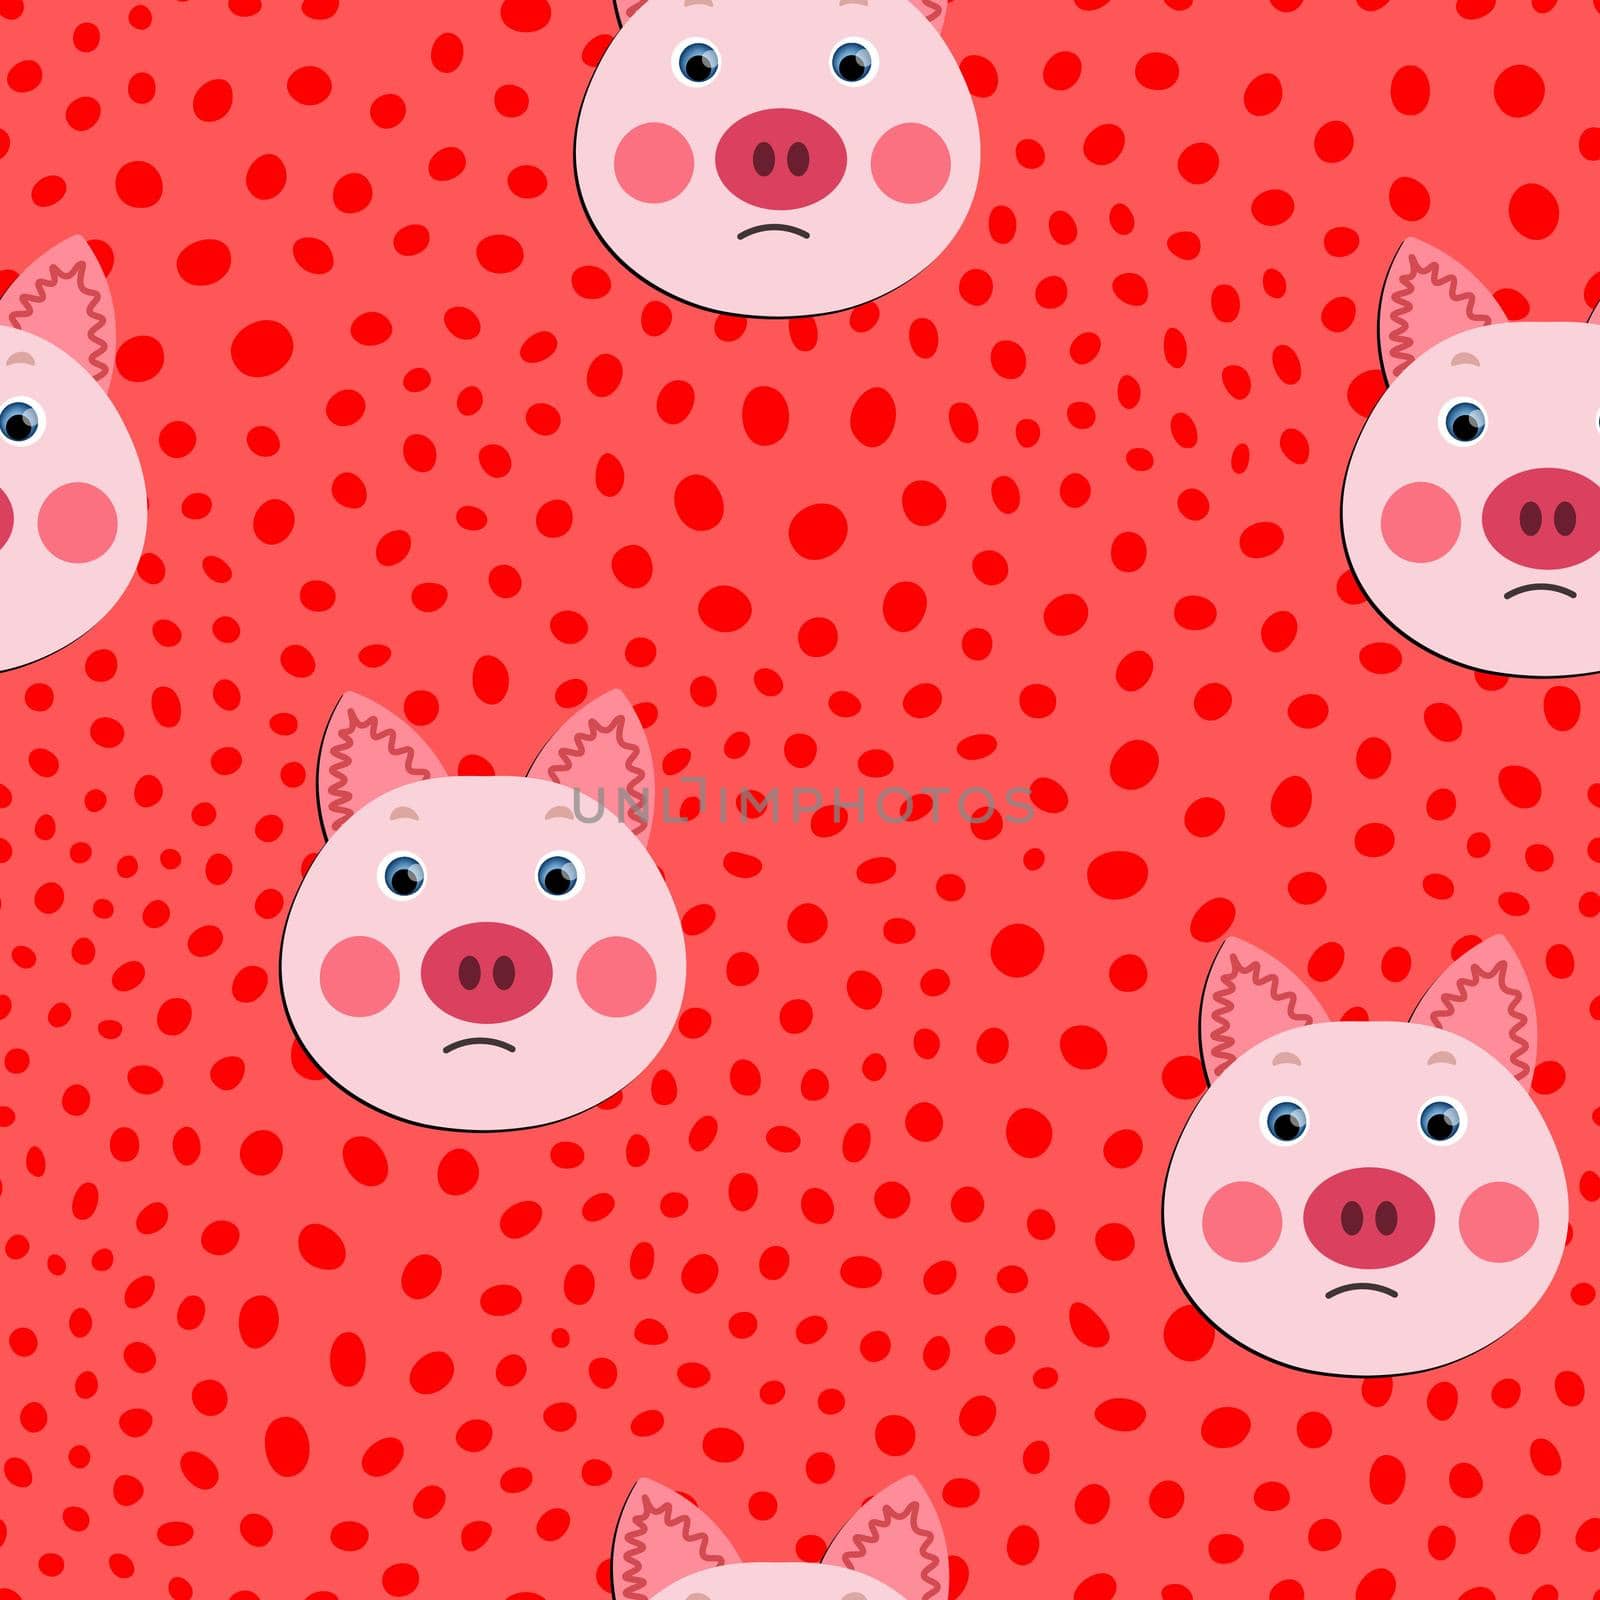 Vector flat animals colorful illustration for kids. Seamless pattern with cute pig face on pink polka dots background. Adorable cartoon character. Design for textures, card, poster, fabric, textile